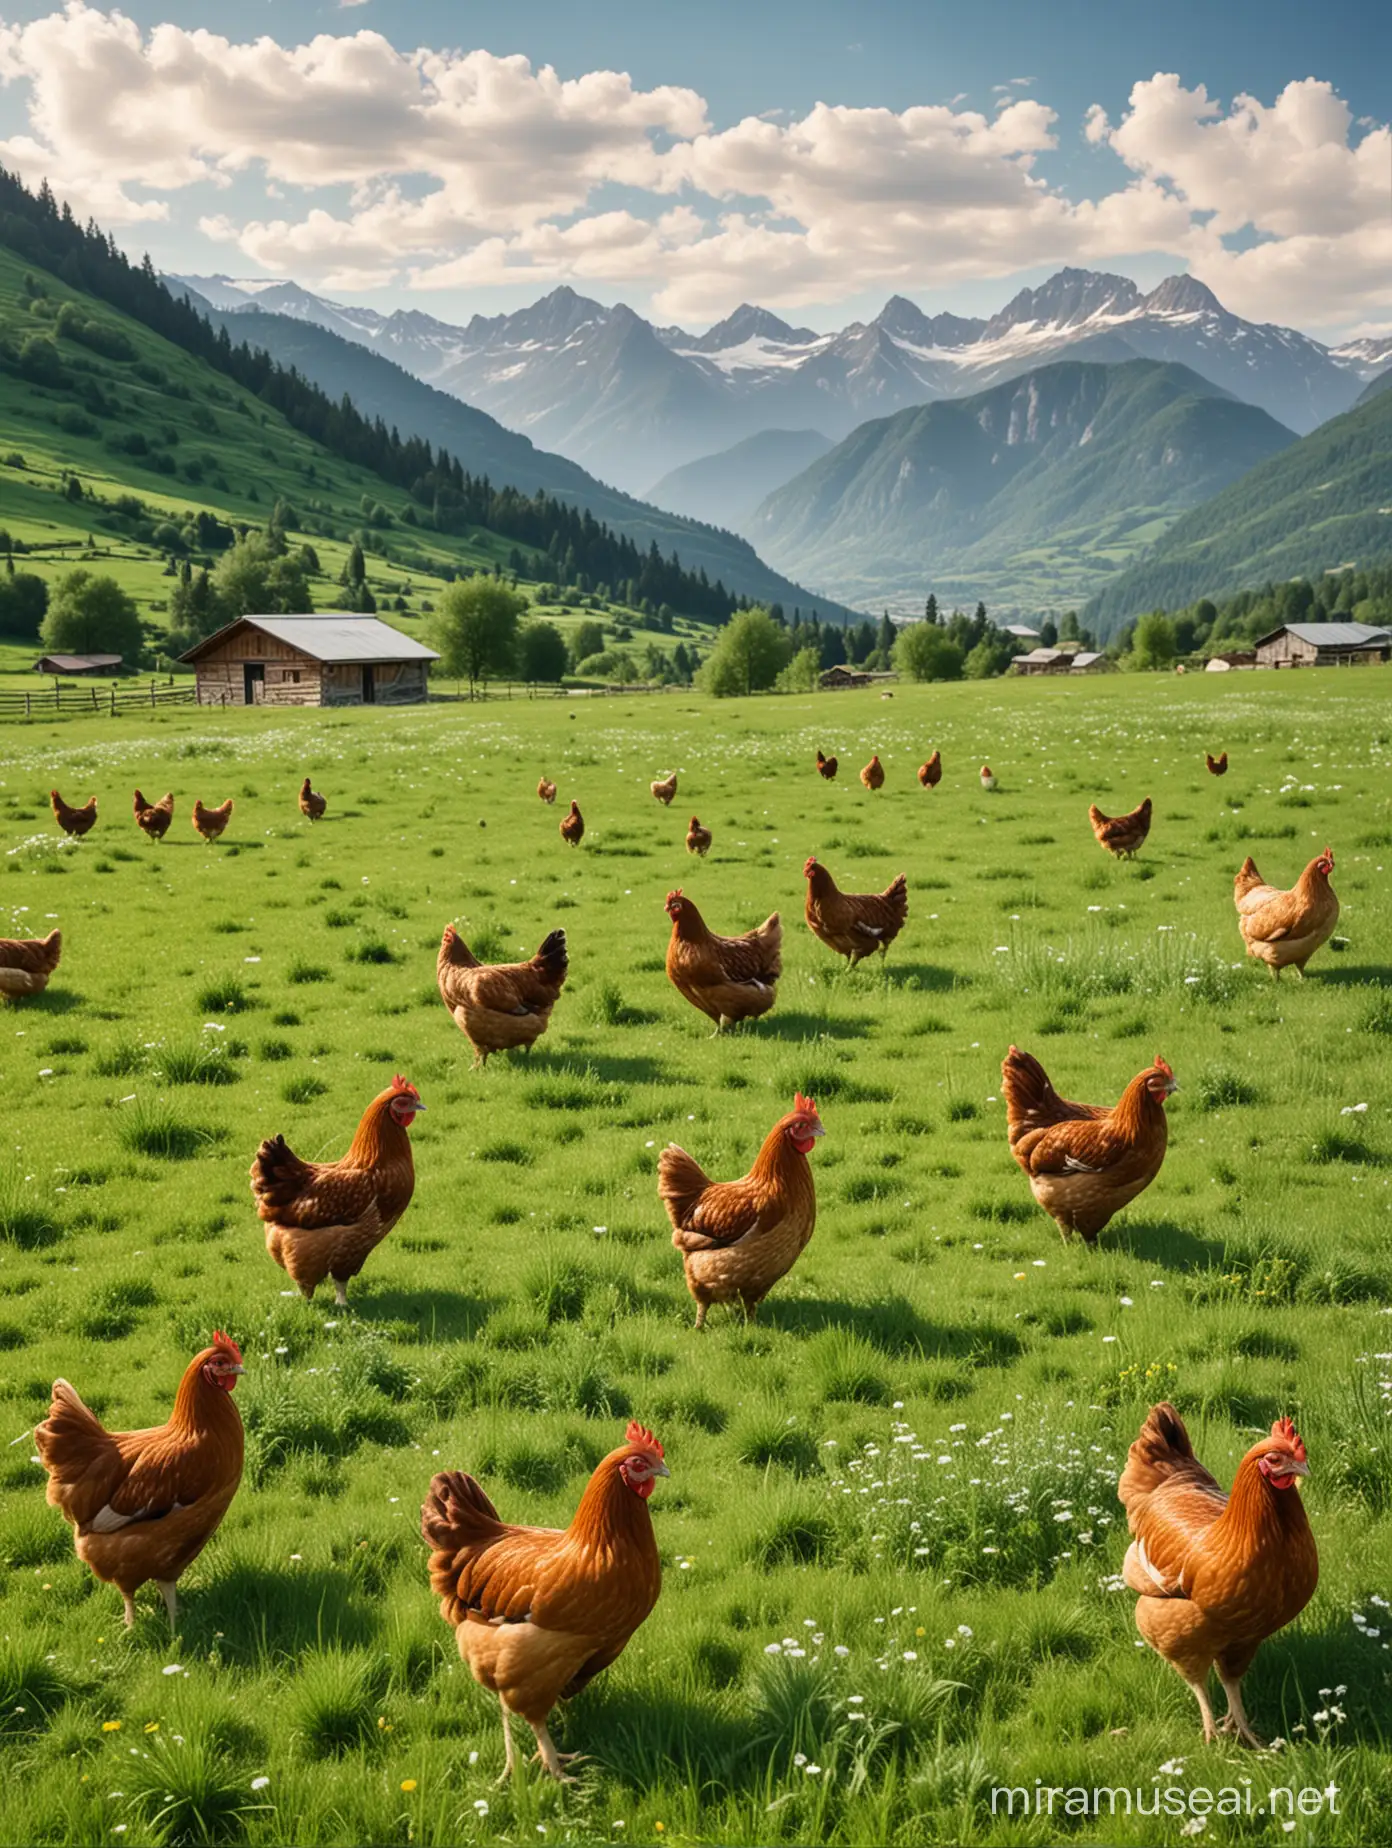 A WIDE FIELD WITH GREEN GRASS AND HERBS, BEAUTIFUL HENS IN THE FOREGROUND, MOUNTAINS IN THE BACKGROUND